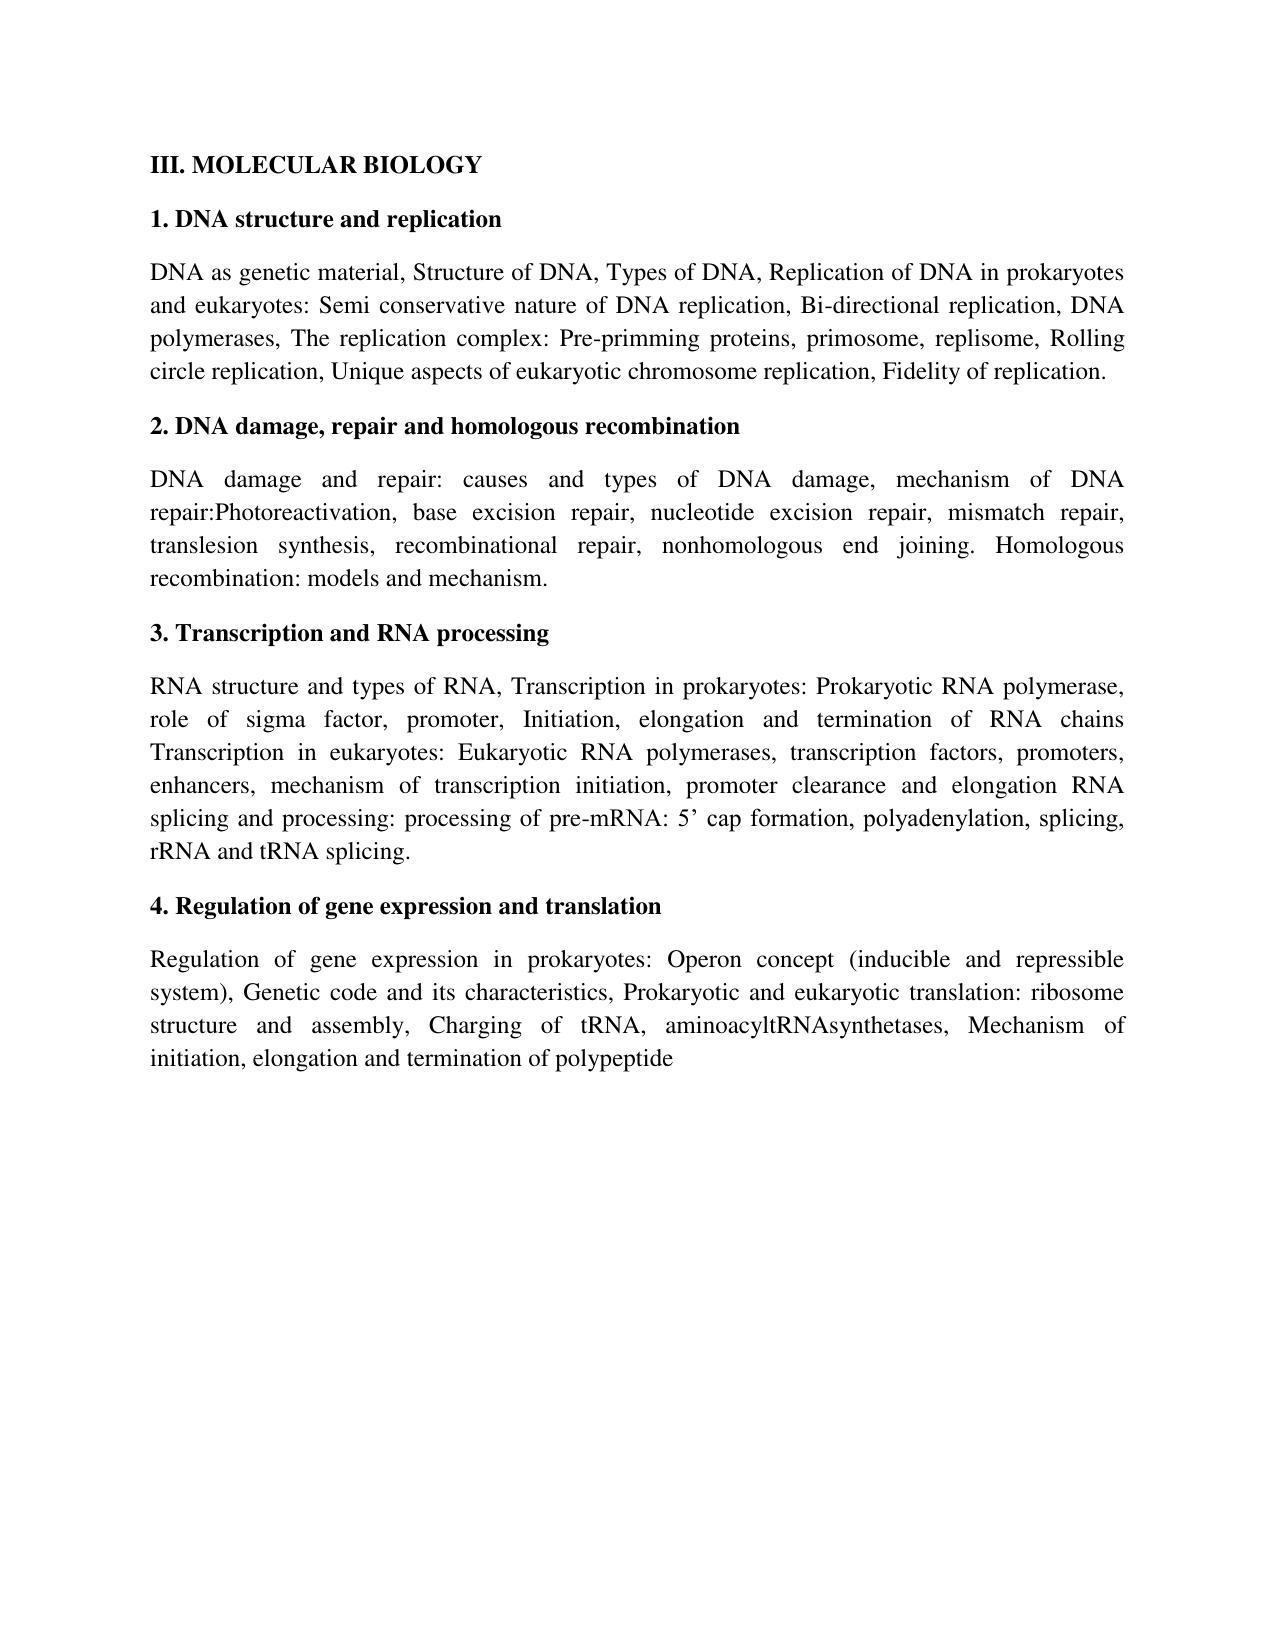 GU ART Post Graduate Diploma in Clinical Genetics and Medical Laboratory Techniques (PGDCG & MLT) Syllabus - Page 3